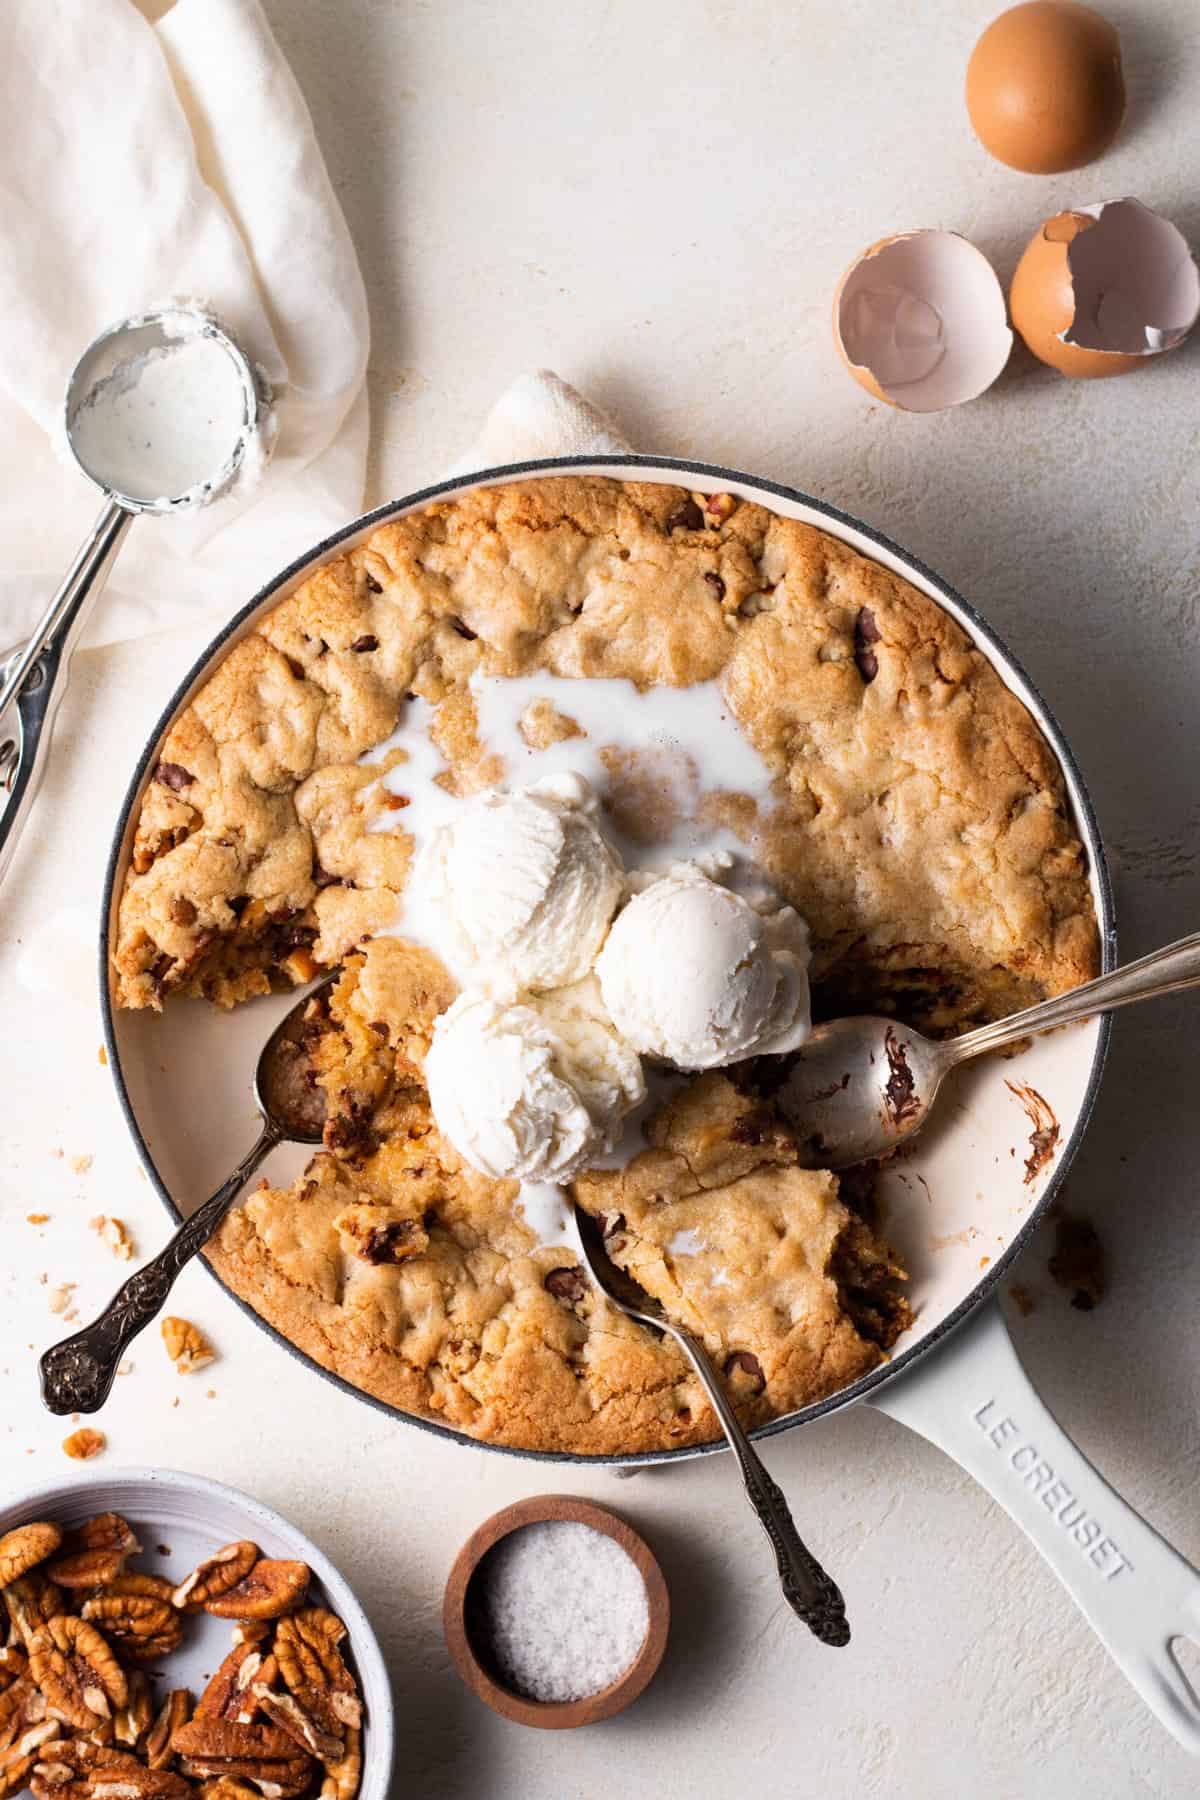 https://sarahsdayoff.com/wp-content/uploads/2023/02/Chocolate-Chip-Skillet-Cookie-2045-scaled.jpg